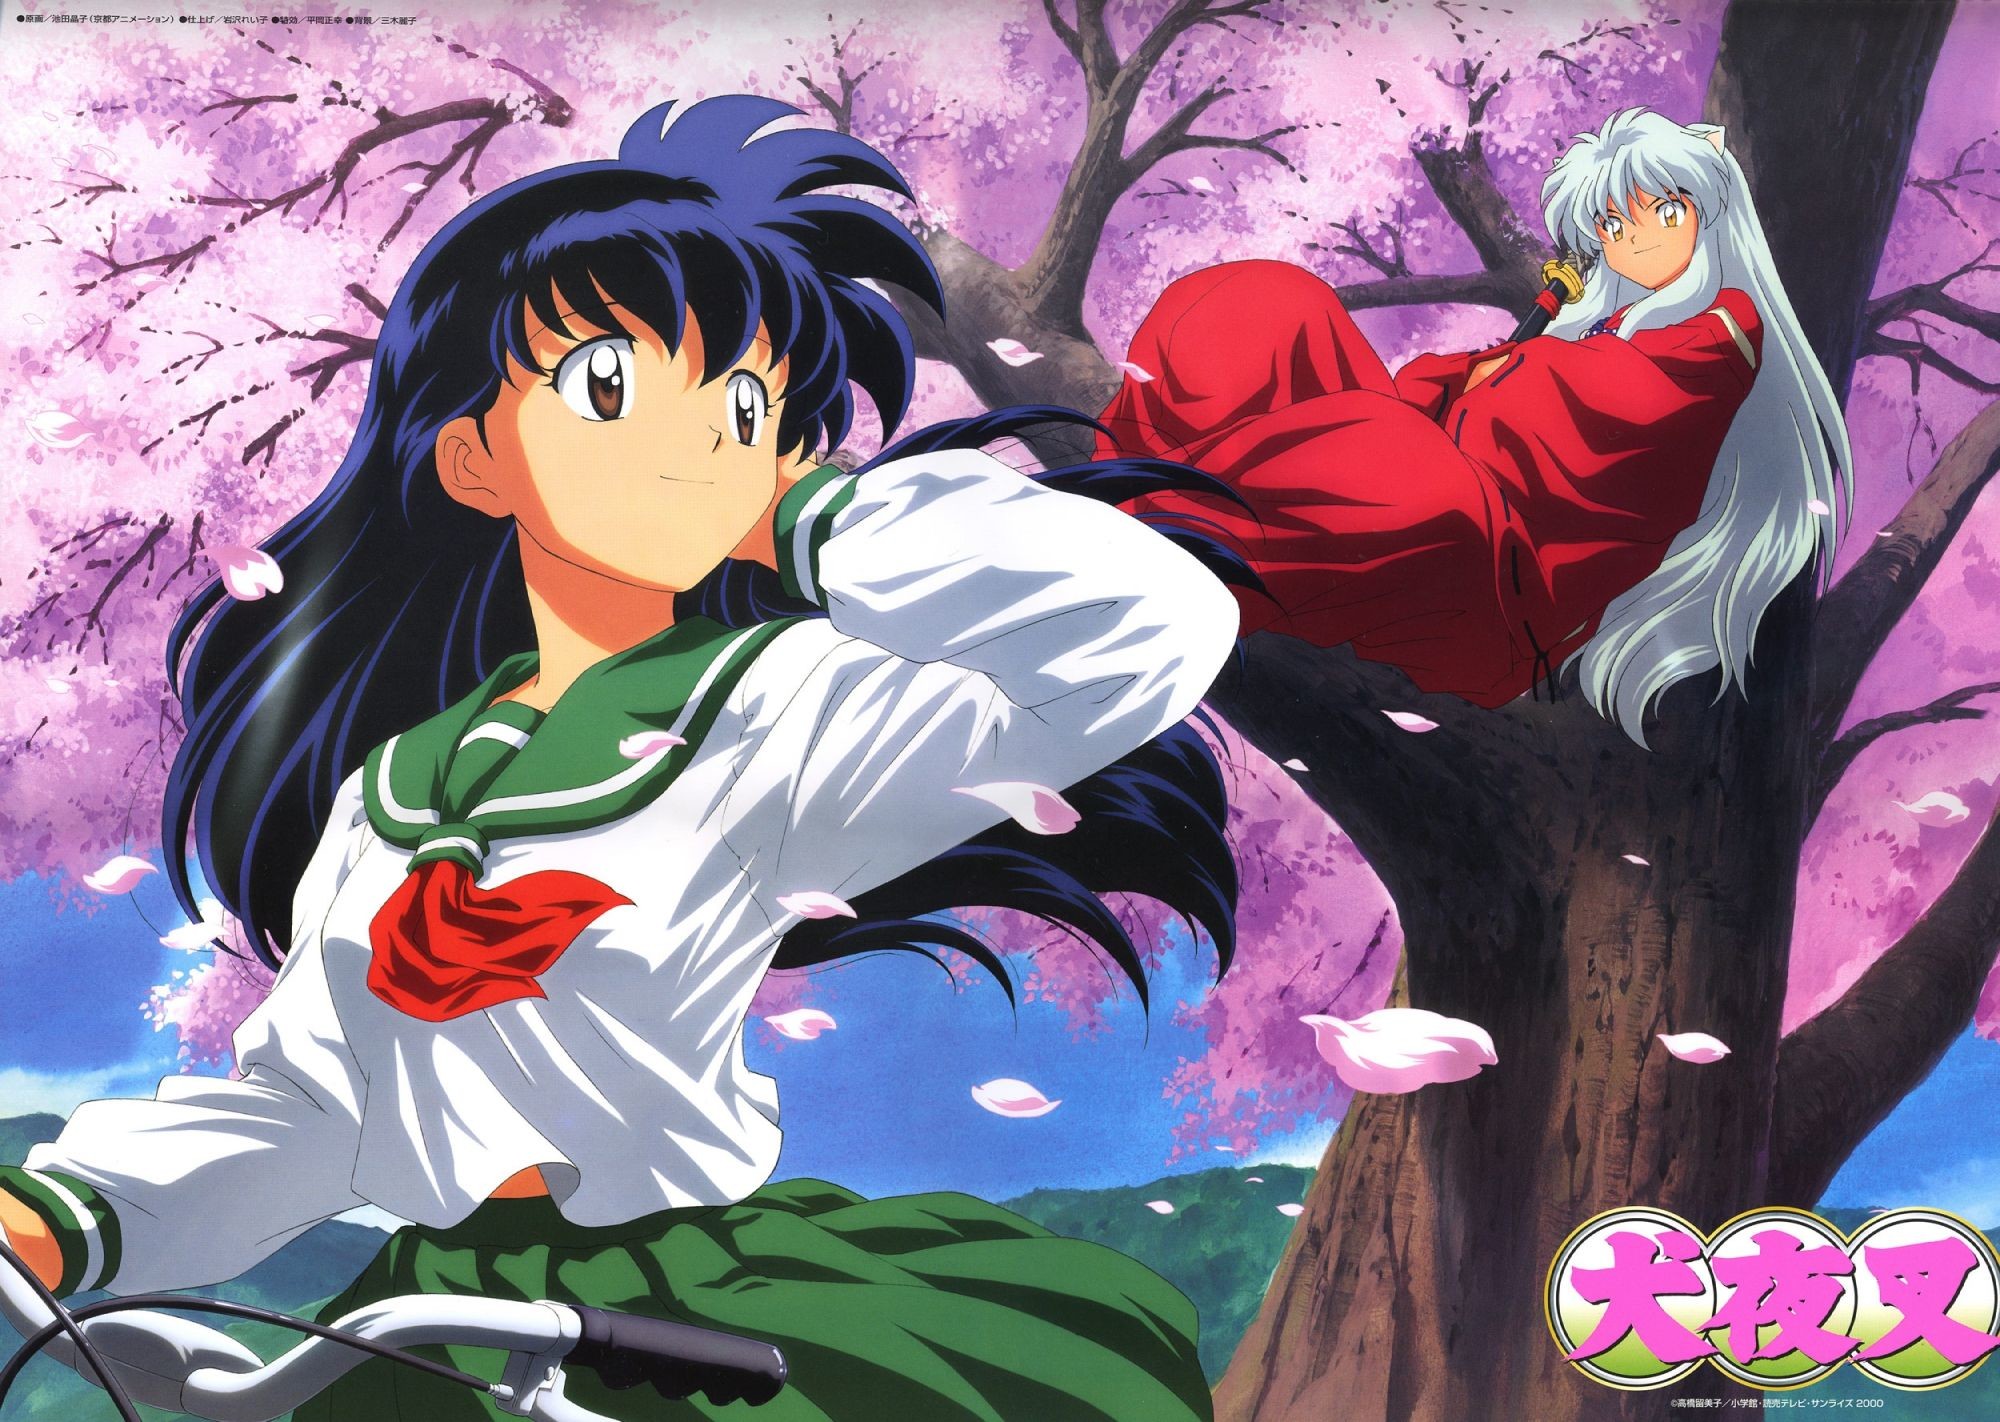 2000x1422 53 InuYasha Wallpapers Backgrounds - Wallpaper Abyss